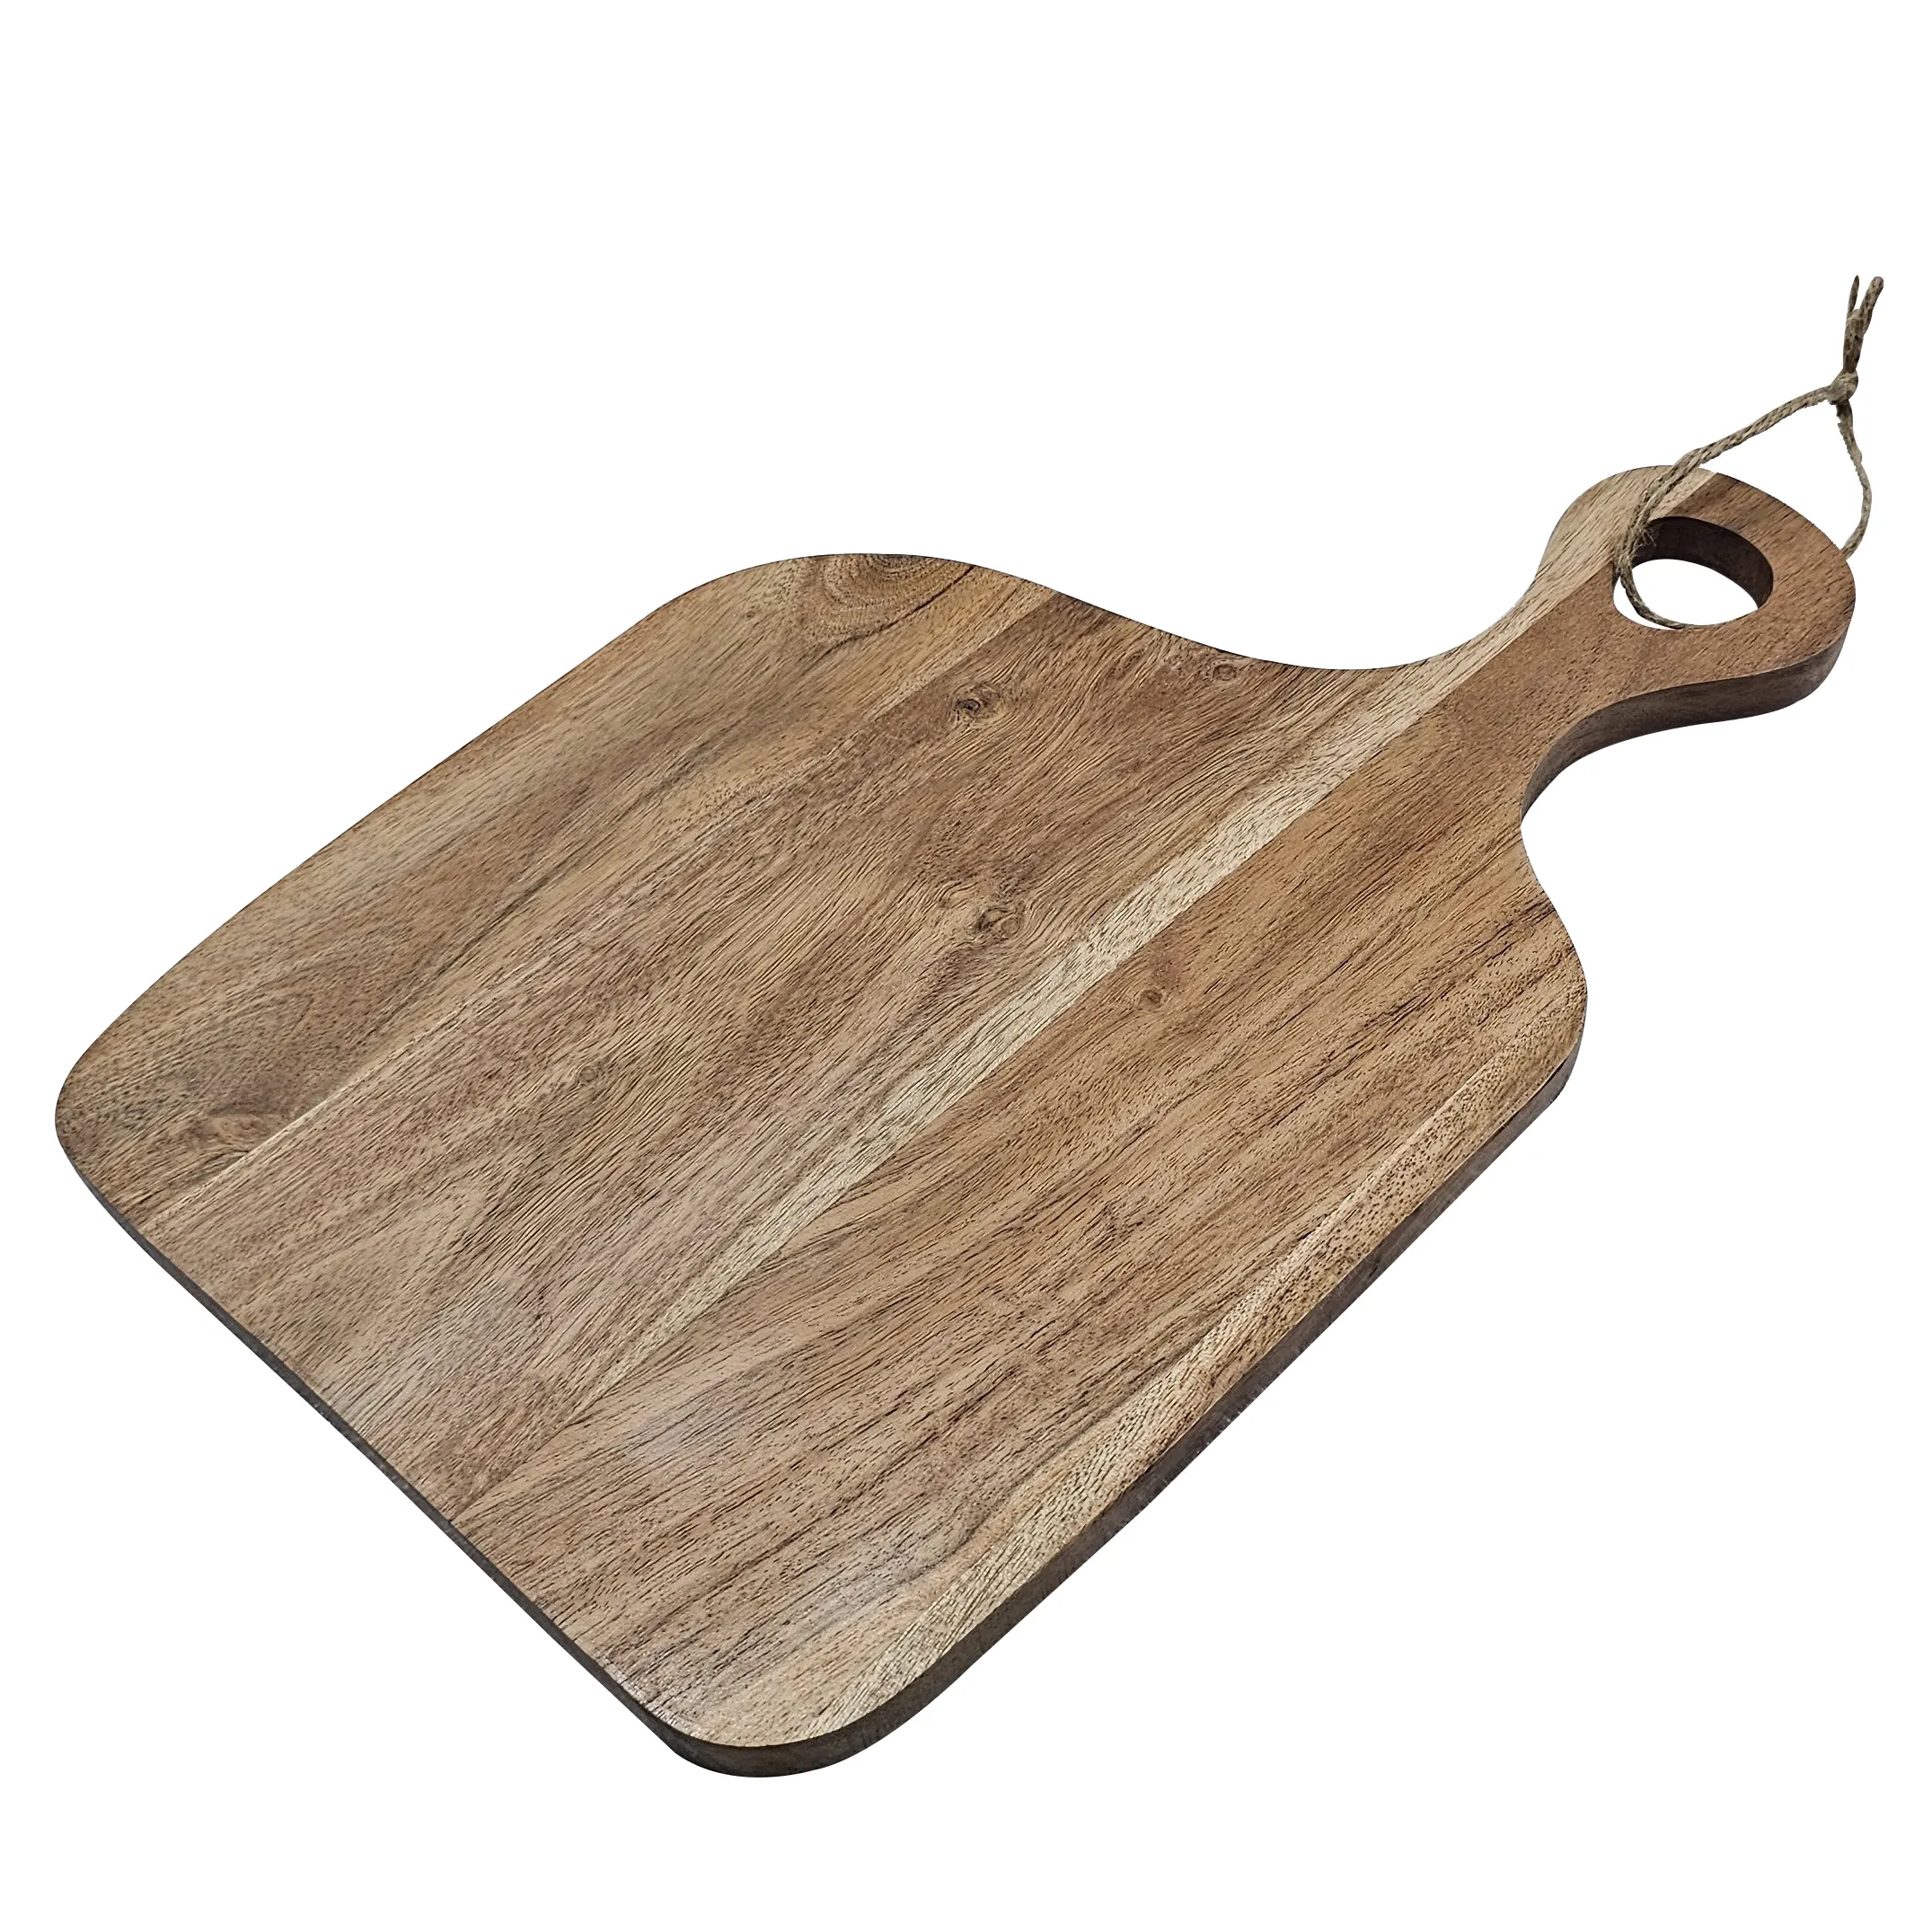 Wooden Chopping Board with jute Grip Available at Wholesale Price made by indian manufacturer